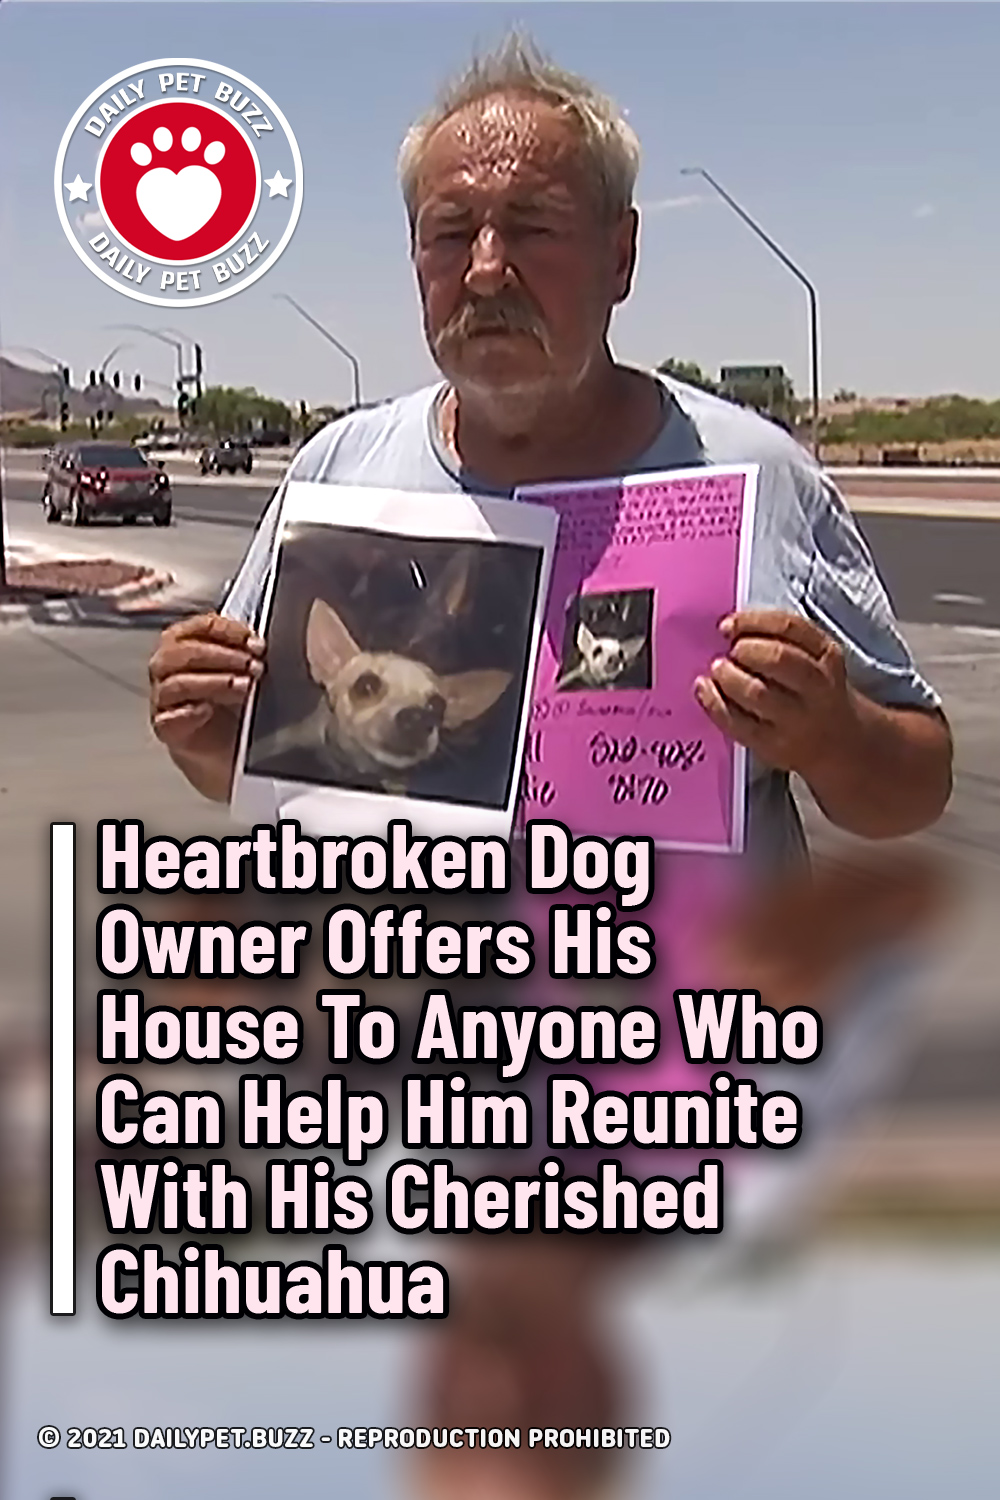 Heartbroken Dog Owner Offers His House To Anyone Who Can Help Him Reunite With His Cherished Chihuahua